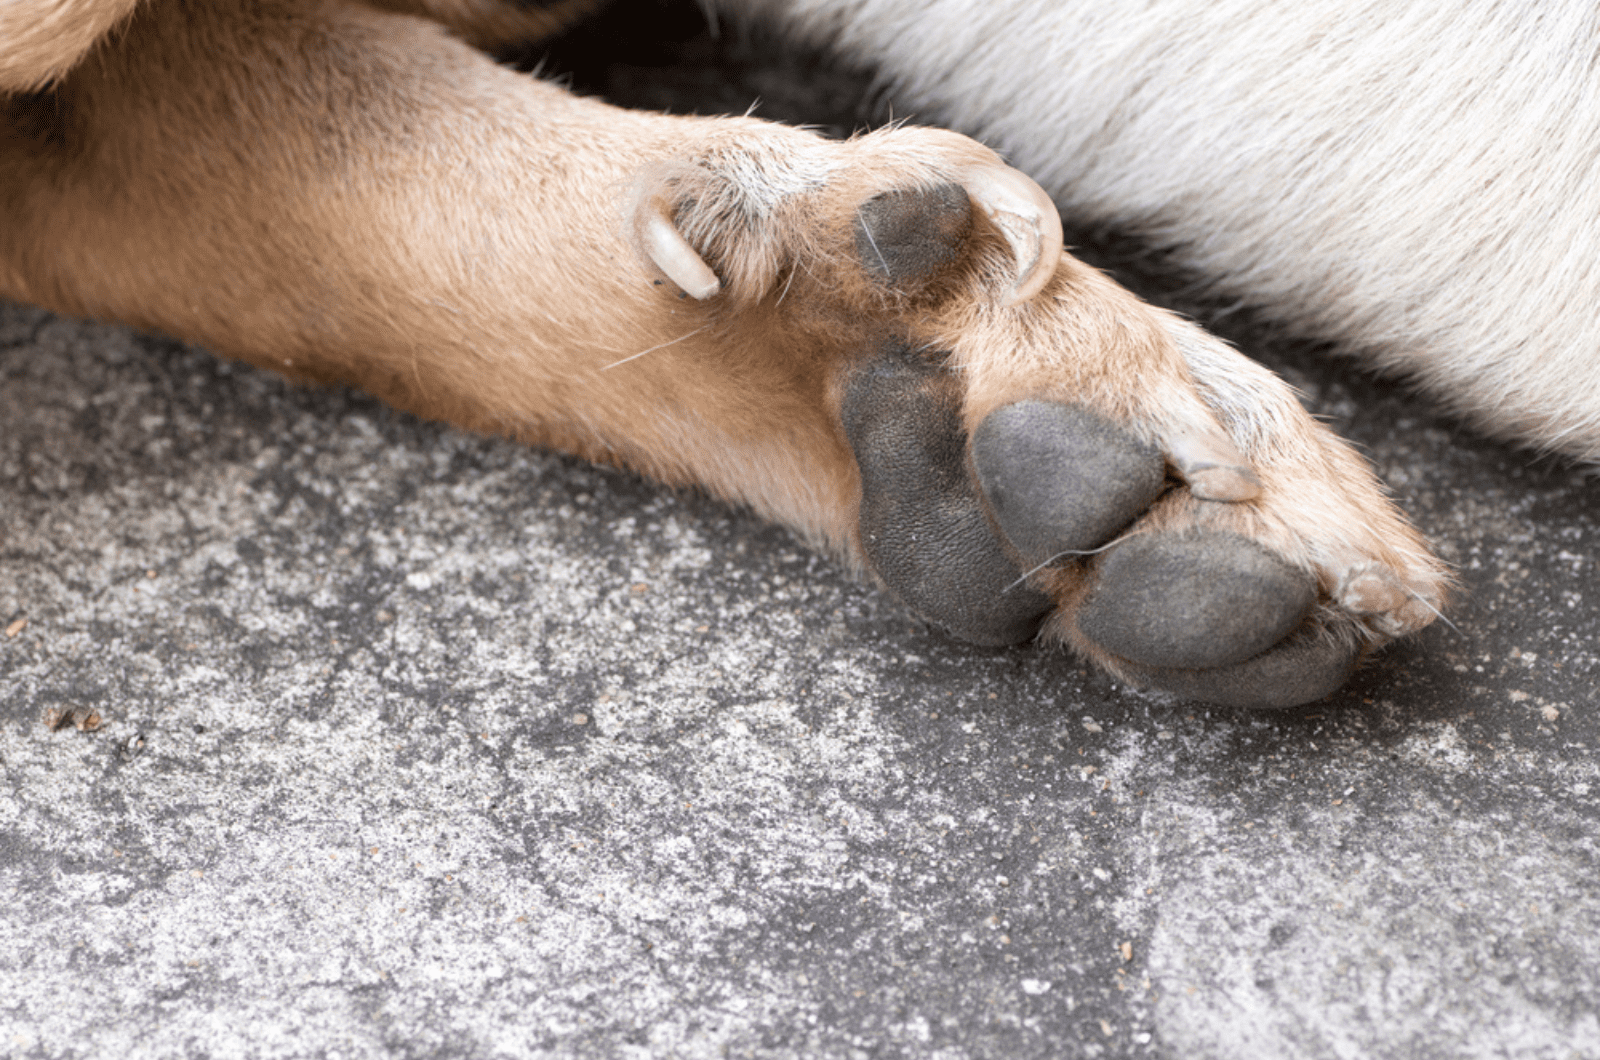 Great Pyrenees Dew Claws: Should You Keep Them Or Not?